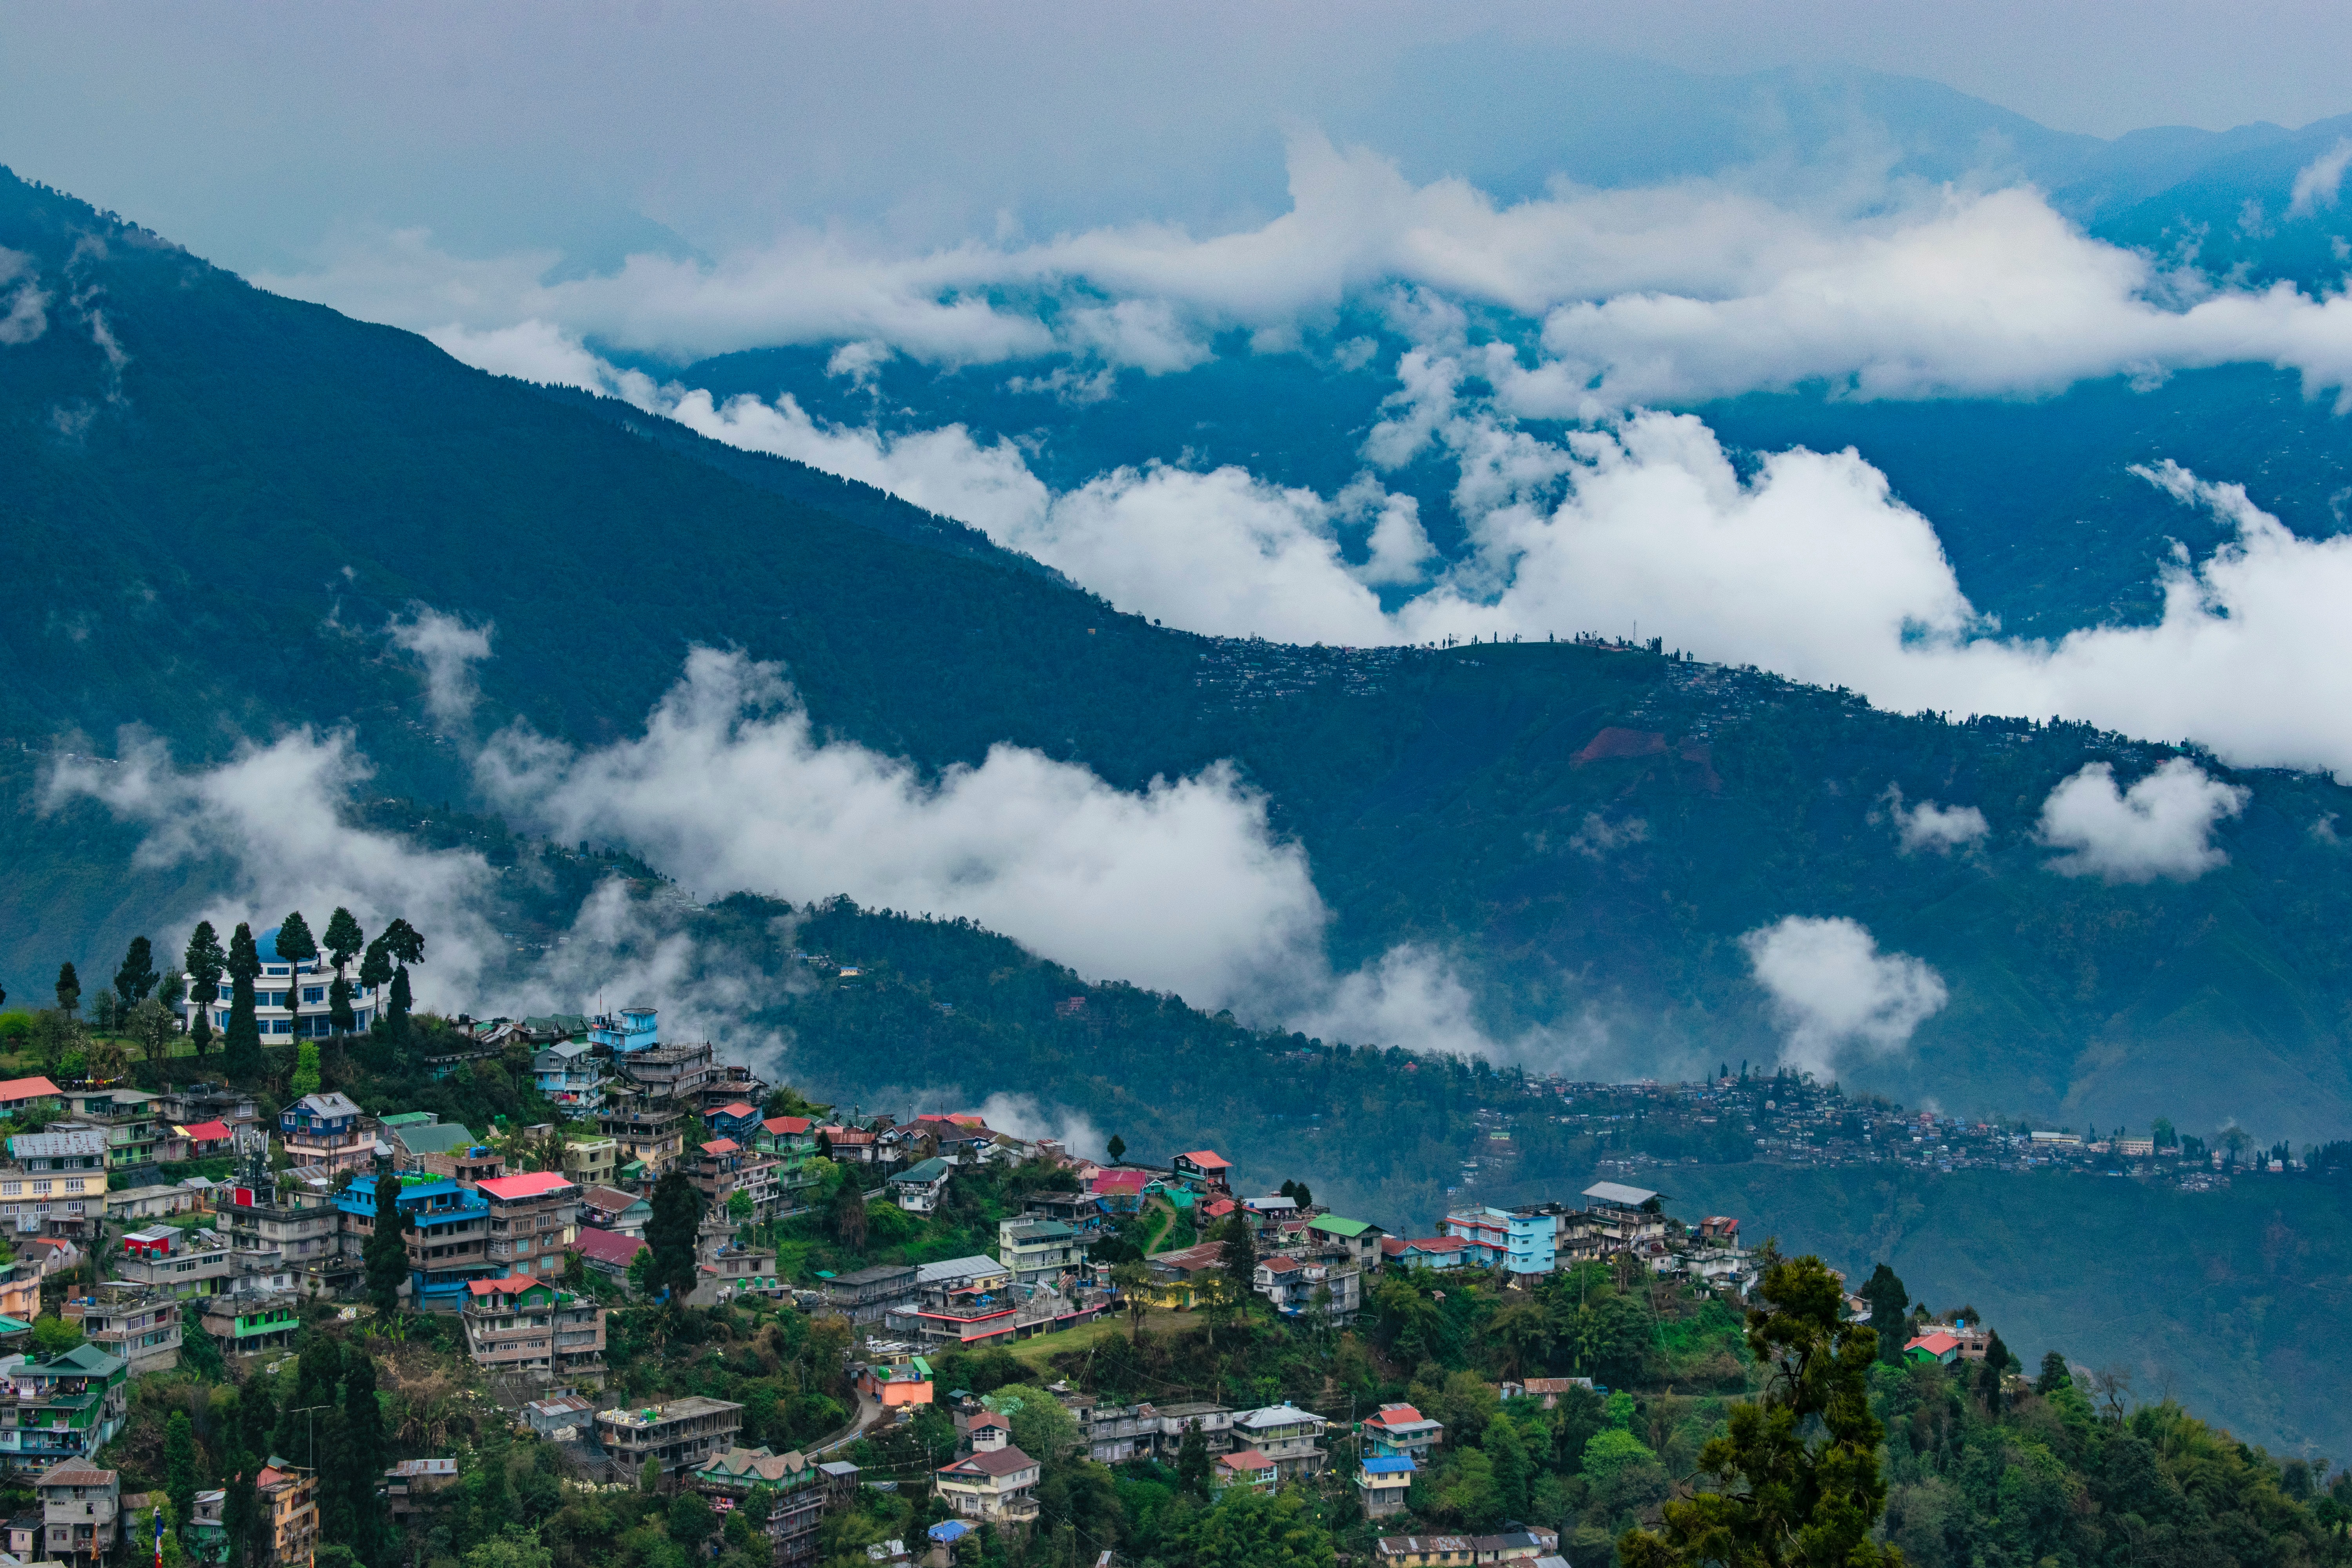  City is straight out of the textbook - Darjeeling